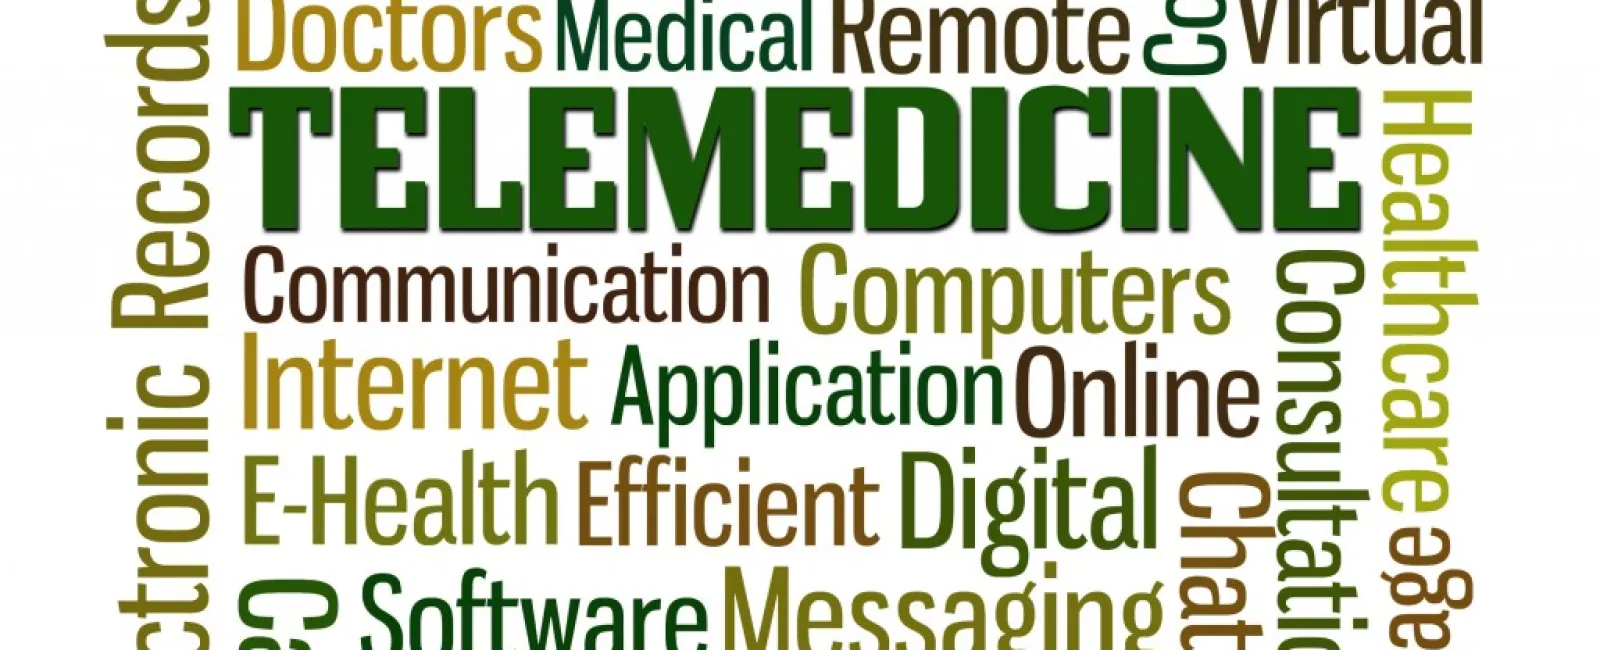 The rapid growth of Telemedicine due to benefits